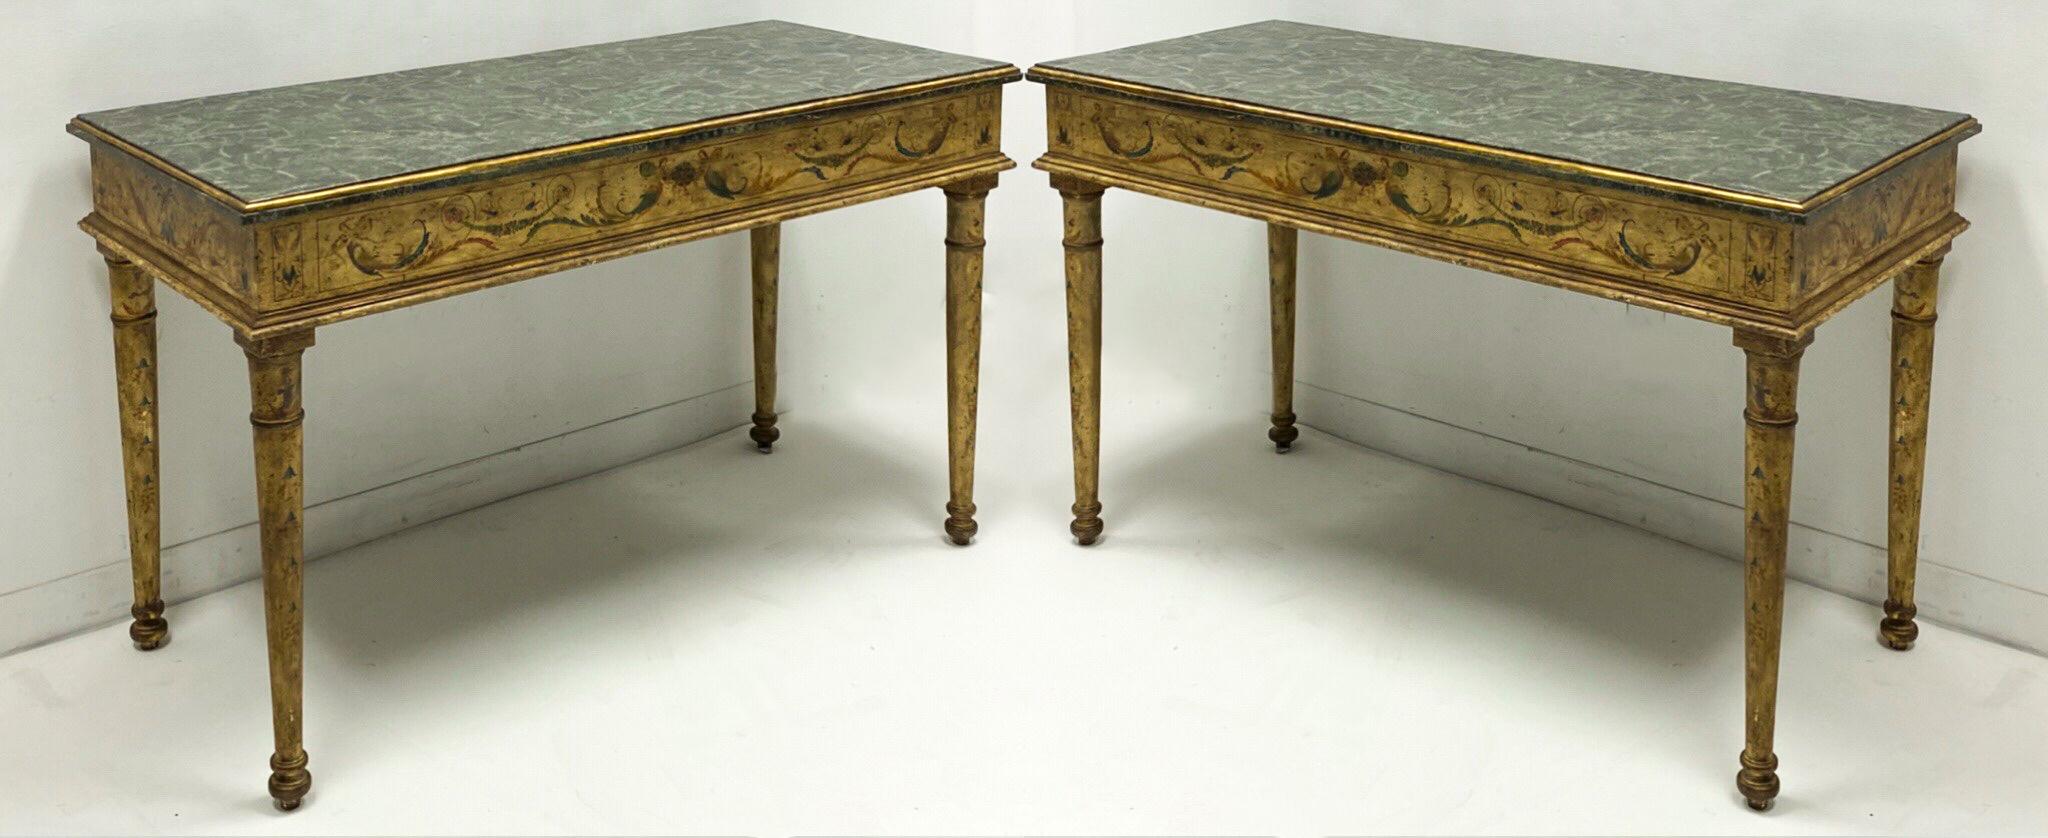 Neo-Classical Style Marble Top Painted Console Tables by Maitland-Smith, Pair For Sale 1